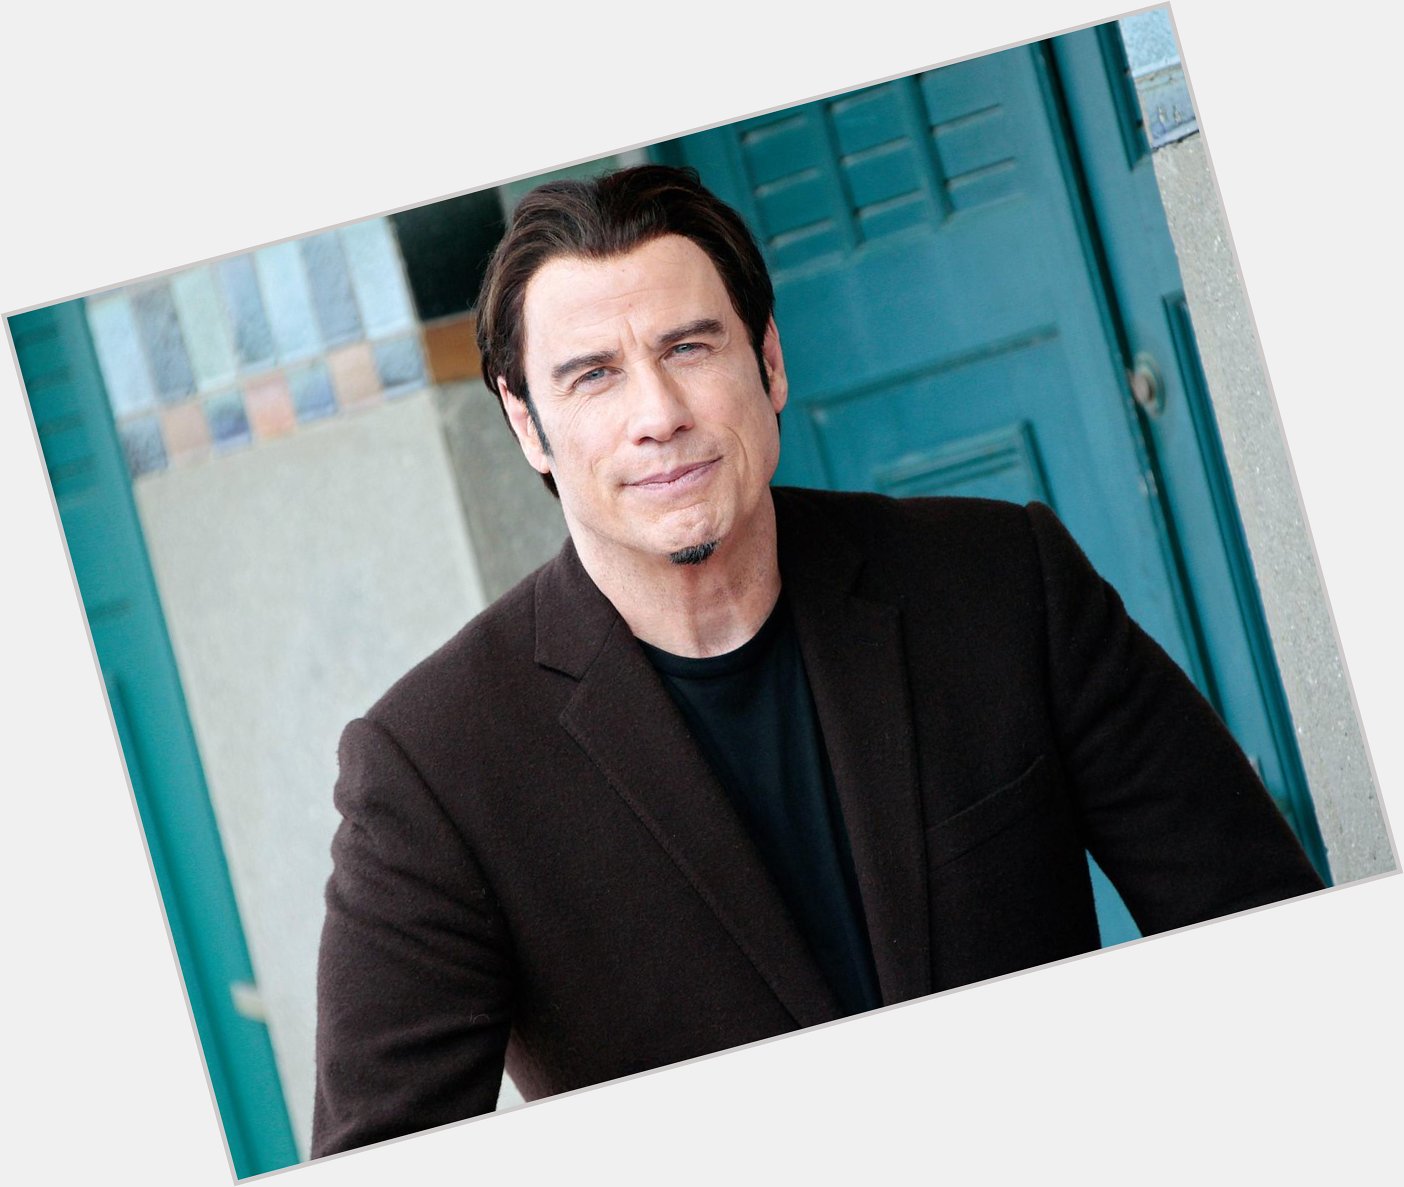 Happy Birthday John Travolta and his ever-youthful hair! The Grease star turns 61 today. 